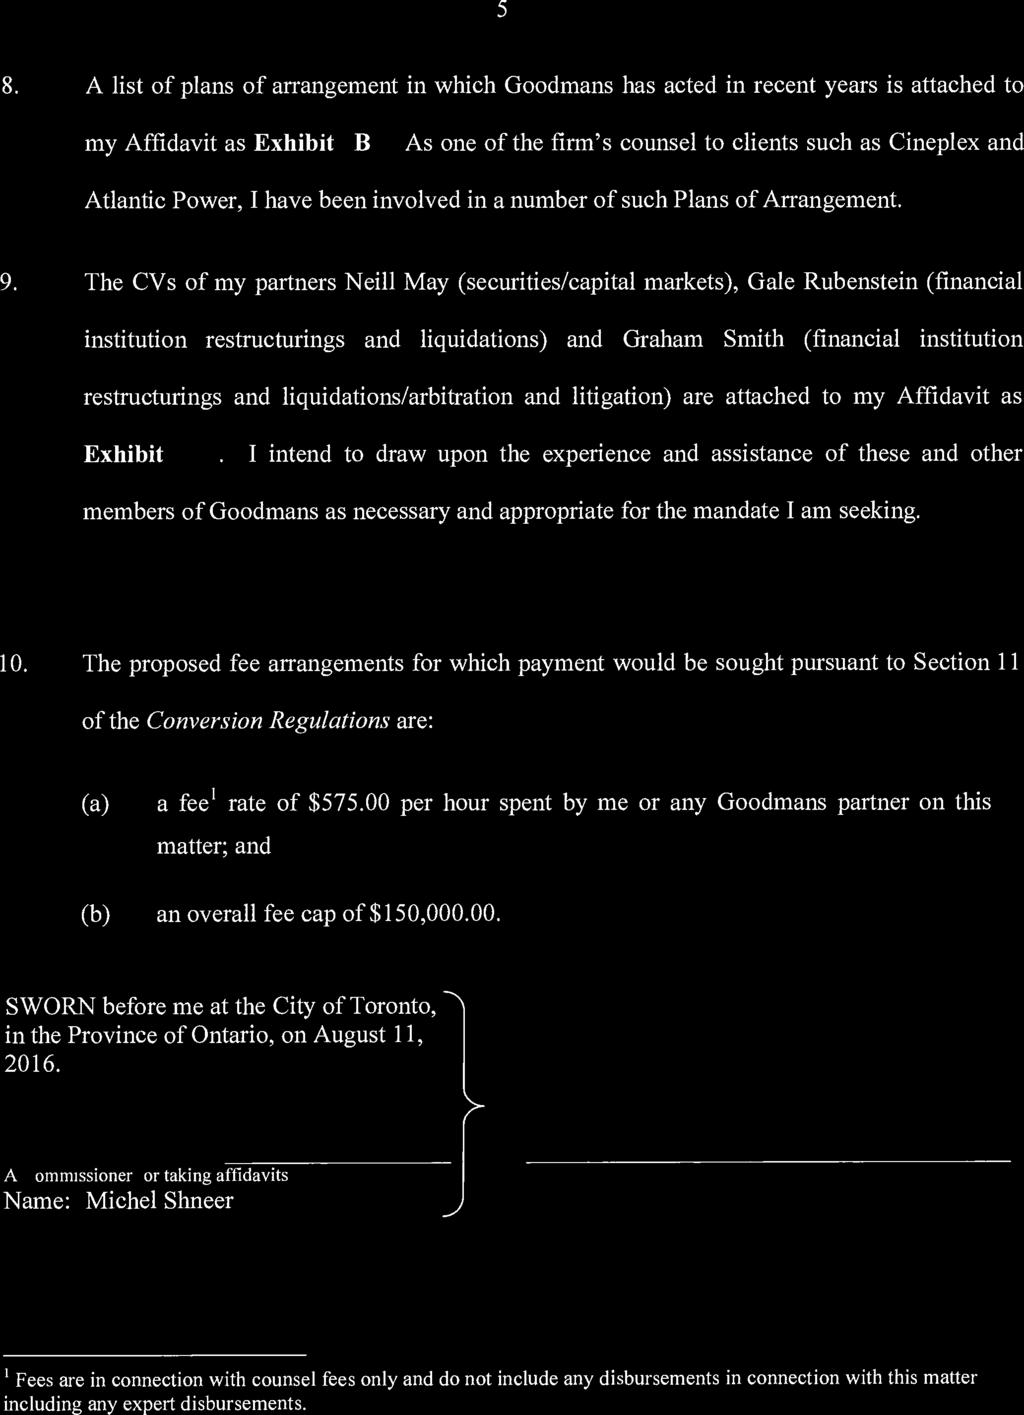 5 8. A list of plans of arrangement in which Goodmans has acted in recent years is attached to my Affidavit as Exhibit B.